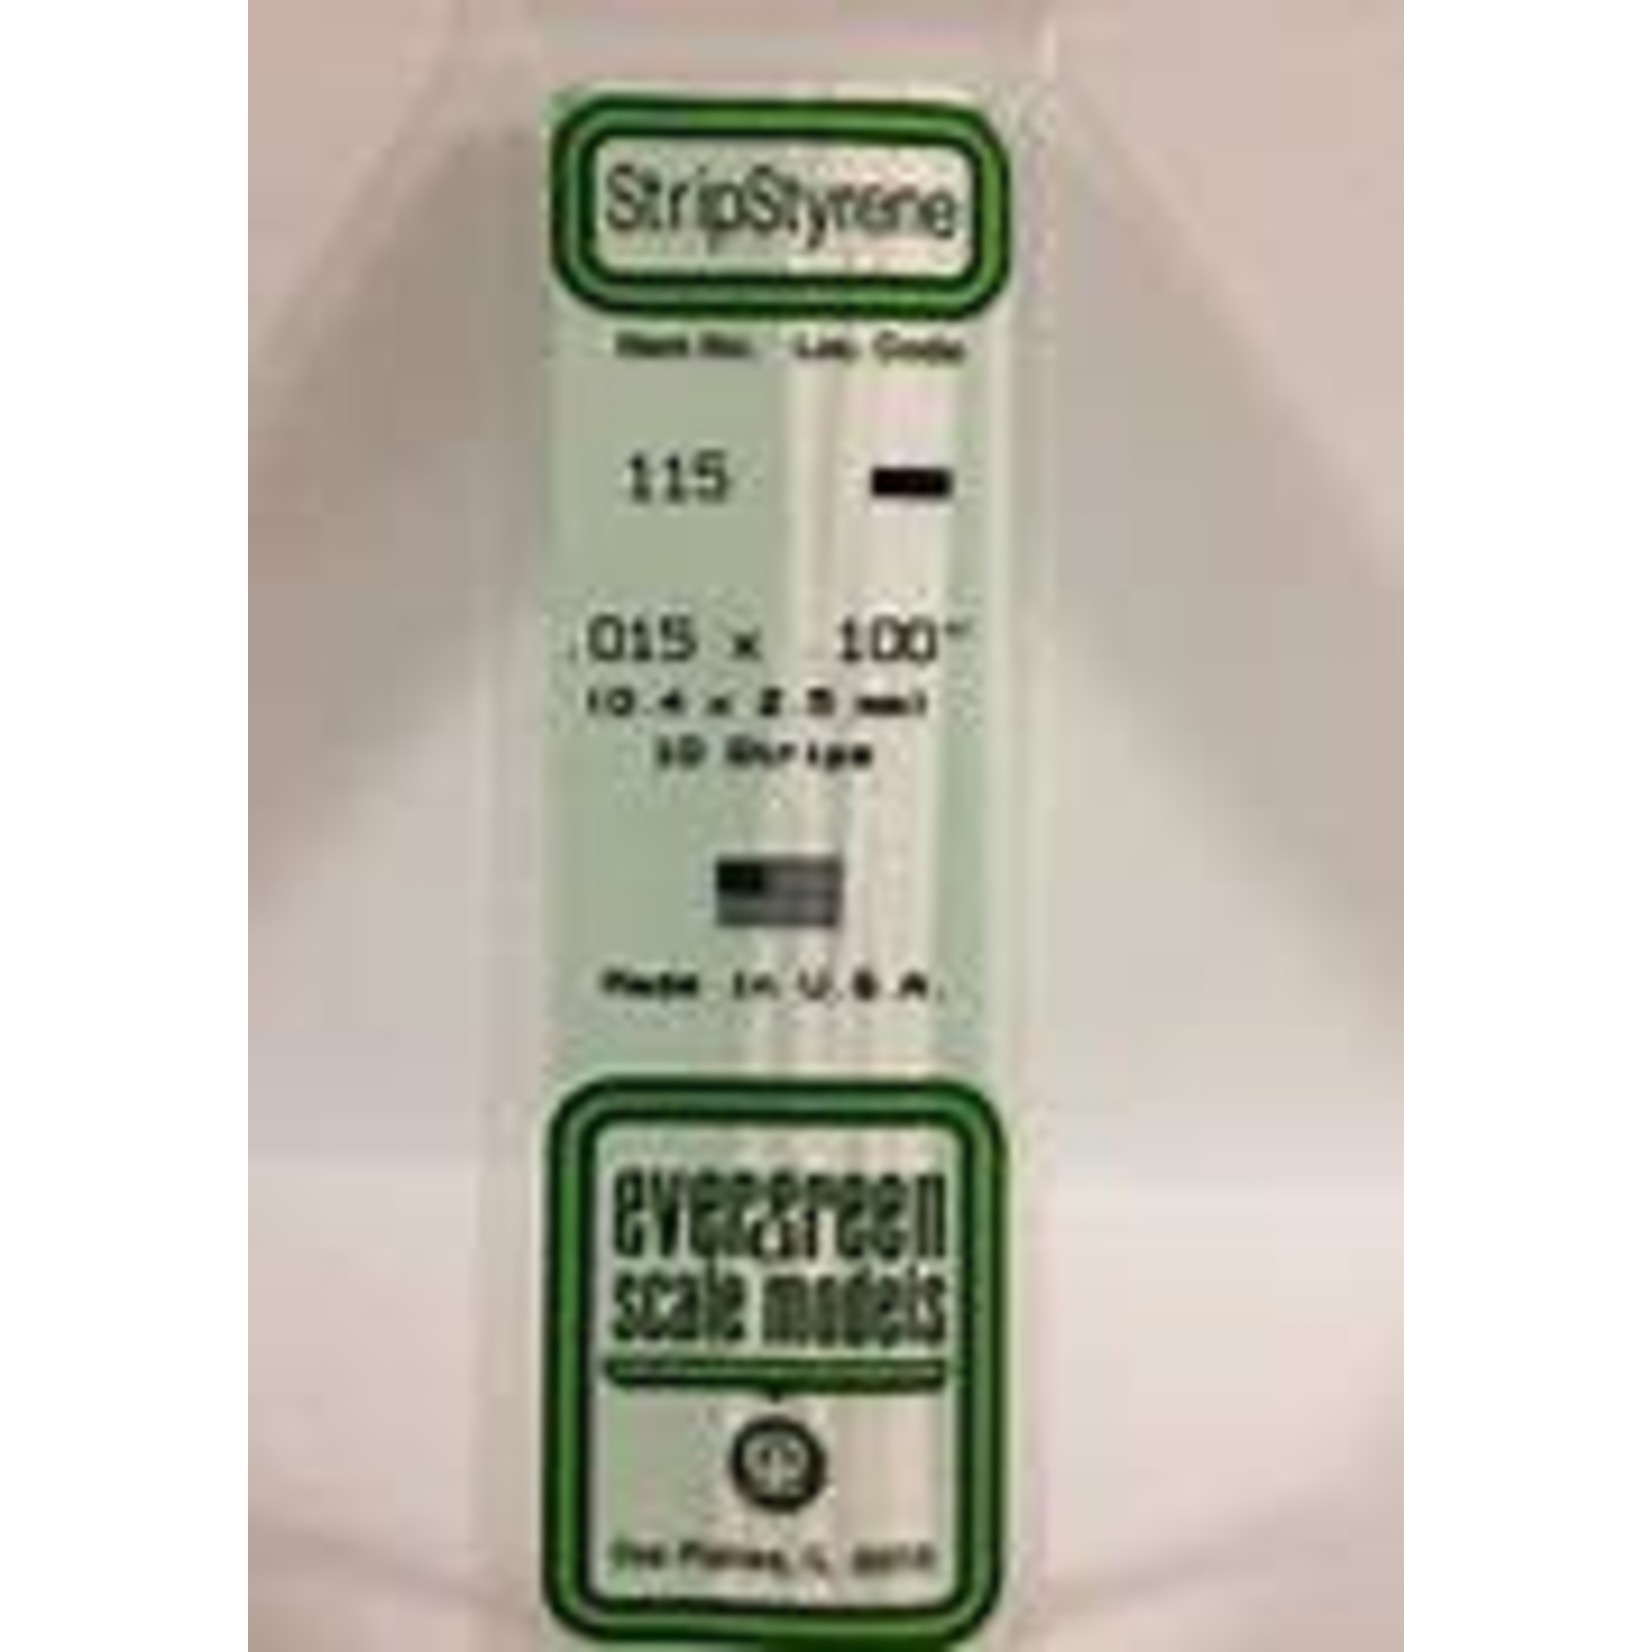 Evergreen Scale Models Evergreen 115 - .015" X .100" OPAQUE WHITE POLYSTYRENE STRIP 787026001159 #115